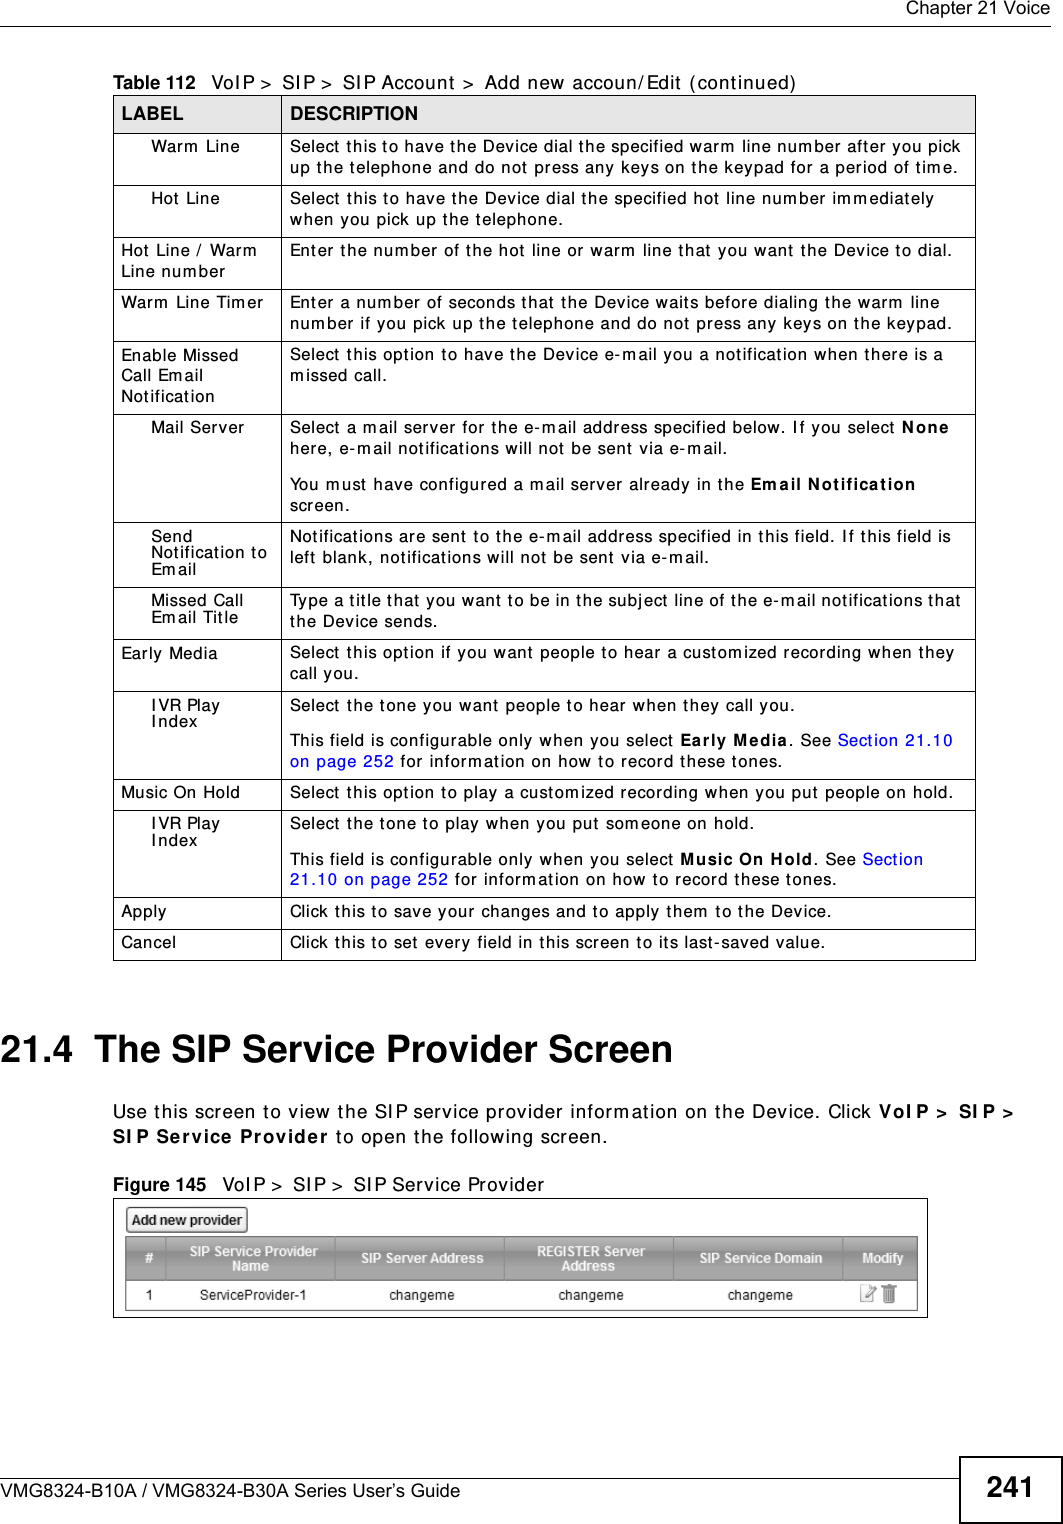  Chapter 21 VoiceVMG8324-B10A / VMG8324-B30A Series User’s Guide 24121.4  The SIP Service Provider Screen Use t his screen t o view  the SI P service provider inform at ion on t he Device. Click VoI P &gt;  SI P &gt;  SI P Se rvice  Provider  t o open the following screen. Figure 145   VoI P &gt;  SI P &gt;  SI P Service ProviderWarm  Line Select  this to hav e t he Device dial t he specified warm  line num ber after you pick up t he t elephone and do not press any keys on t he keypad for a period of t im e.Hot  Line Select  this t o have the Device dial t he specified hot line num ber im m ediately when you pick up the t elephone.Hot  Line /  Warm  Line num berEnter the num ber of t he hot  line or warm  line that  you want t he Device to dial.Warm  Line Tim er  Ent er a number of seconds that  the Device waits before dialing t he warm  line num ber if you pick up t he t elephone and do not press any keys on the keypad.Enable Missed Call Email Not ificationSelect  t his opt ion to hav e t he Dev ice e- m ail you a not ificat ion when there is a m issed call.Mail Server Select  a m ail server  for t he e- m ail address specified below. I f you select N one here, e-m ail not ificat ions will not  be sent  via e- m ail.You m ust have configur ed a m ail server already in the Em ail Not ifica tion  screen.Send Not ification to Em ailNot ificat ions are sent to t he e- m ail address specified in this field. I f t his field is left blank, not ificat ions w ill not be sent  via e- m ail.Missed Call Em ail Tit leType a t it le t hat you want t o be in t he subject line of the e- m ail notificat ions that the Device sends.Early Media Select  t his opt ion if you w ant people t o hear a custom ized recording when they call you.I VR Play  I ndexSelect  the tone you want  people to hear when t hey call you.This field is configurable only when you select  Early  M edia. See Section 21.10 on page 252 for inform at ion on how  to record these tones.Music On Hold Select this option t o play a cust om ized recording w hen you put people on hold.I VR Play  I ndexSelect  the t one to play when you put  som eone on hold.This field is configurable only when you select  Music On Hold. See Sect ion 21.10 on page 252 for inform ation on how  to record these tones.Apply Click t his t o save your changes and to apply them  t o the Device.Cancel Click this to set every field in t his screen t o it s last - saved value.Table 112   VoI P &gt;  SI P &gt;  SI P Account &gt;  Add new accoun/ Edit  ( continued)LABEL DESCRIPTION